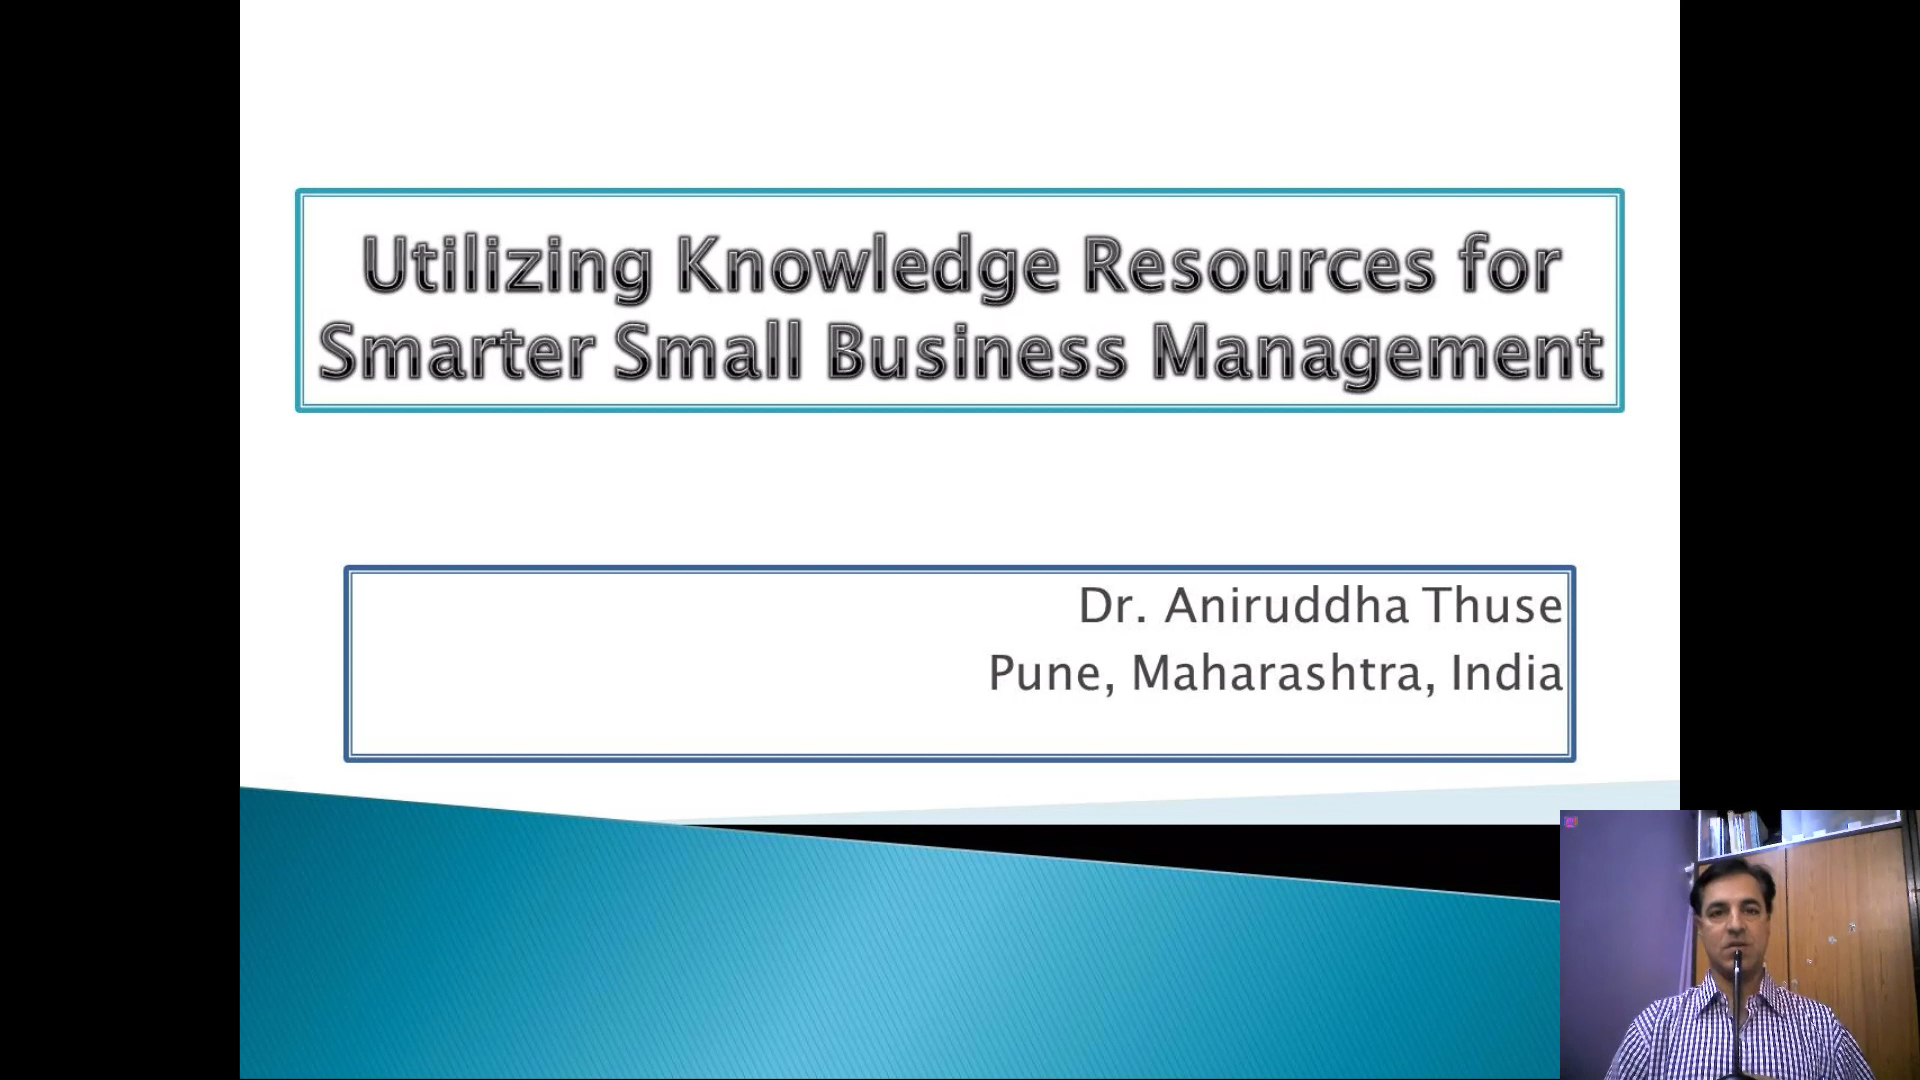 Utilizing Knowledge Resources for Smarter Small Business Management